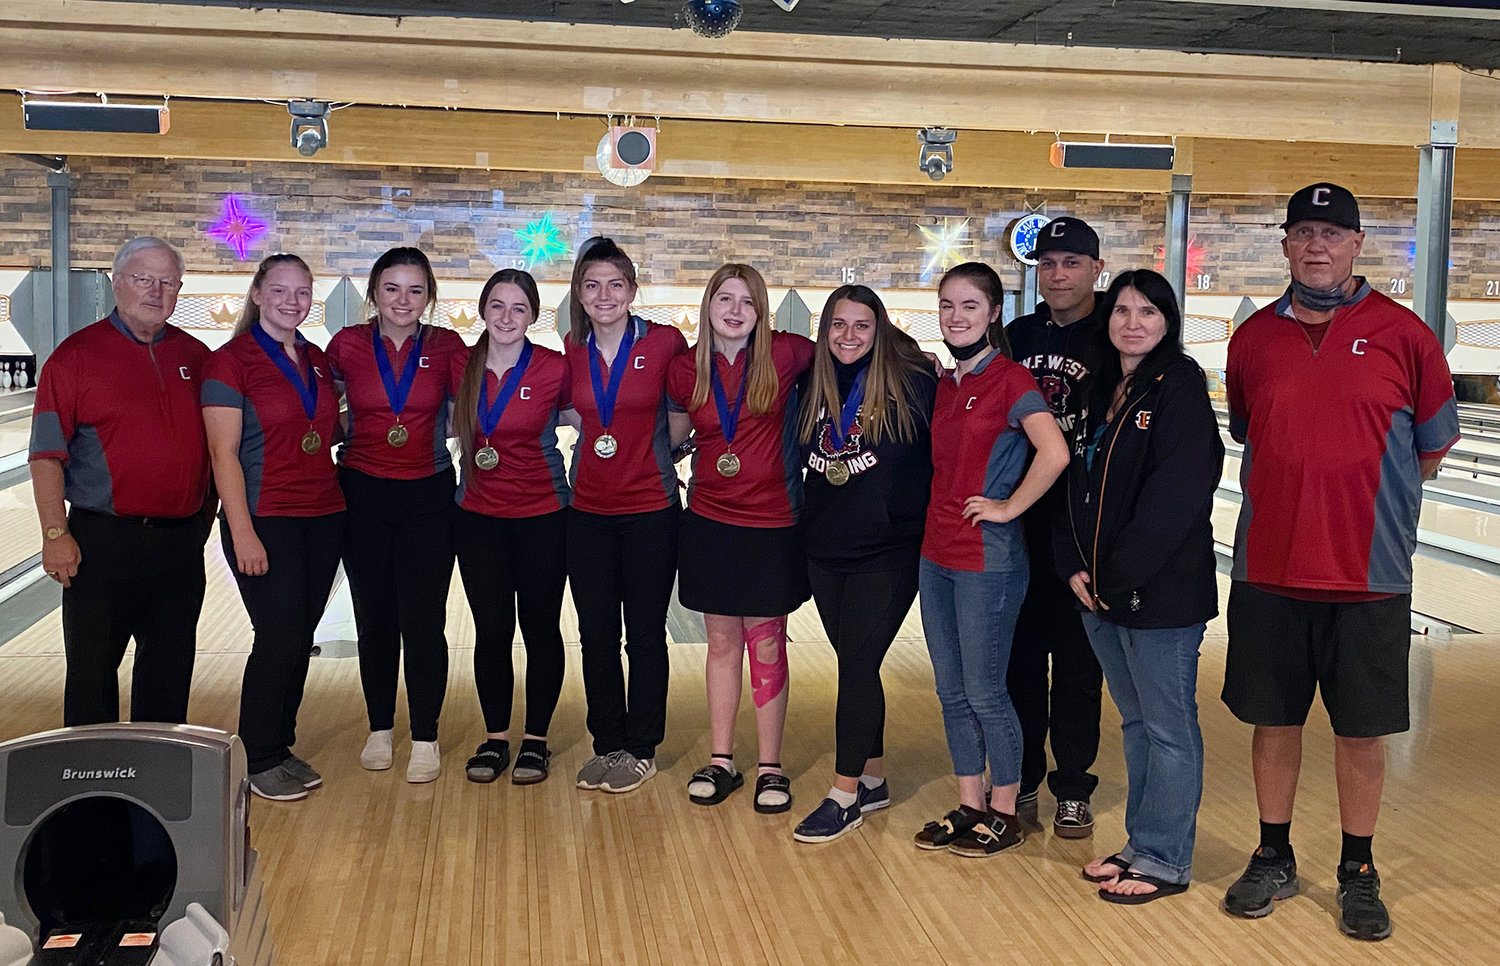 The W.F. West girls bowling team won their second-straight district championship Wednesday in Longview. From left, coach Bob Spahr, Cami Aldrich, Clara Bunker, Jessica Loflin, Brianna Powe, Piper Chalmers, Anahbelle Lopez, Audrey Toynbee, coach Don Bunker, coach Cassandra Chalmers and coach Rich Bunker